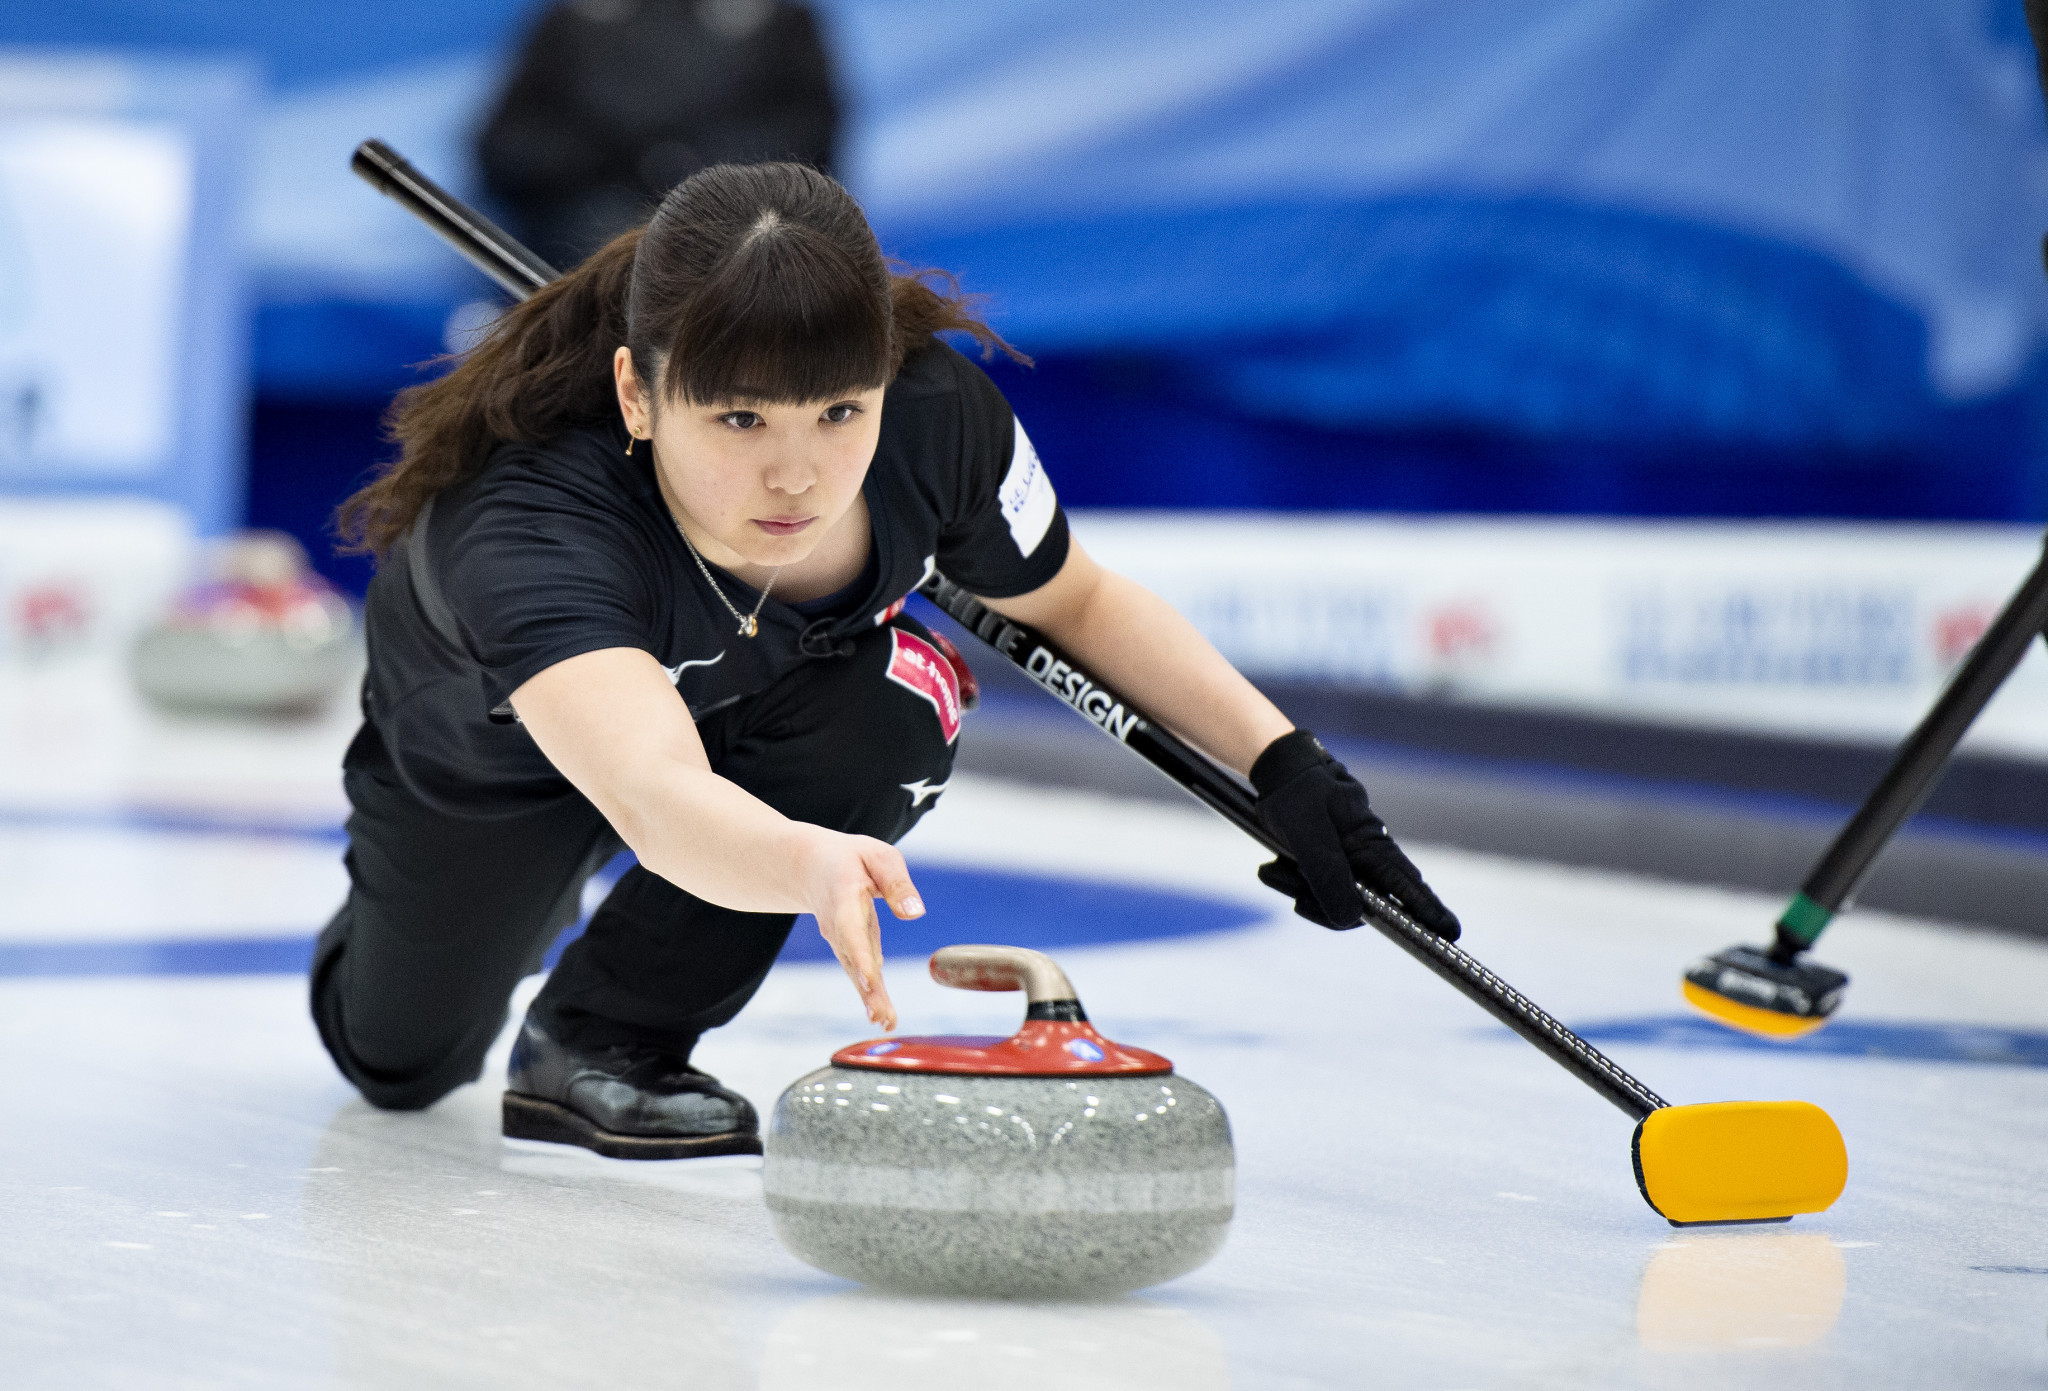 Chiaki Matsumura helped Japan to their second and third win of the World Mixed Doubles Curling Championship with Yasumasa Tanida ©Getty Images